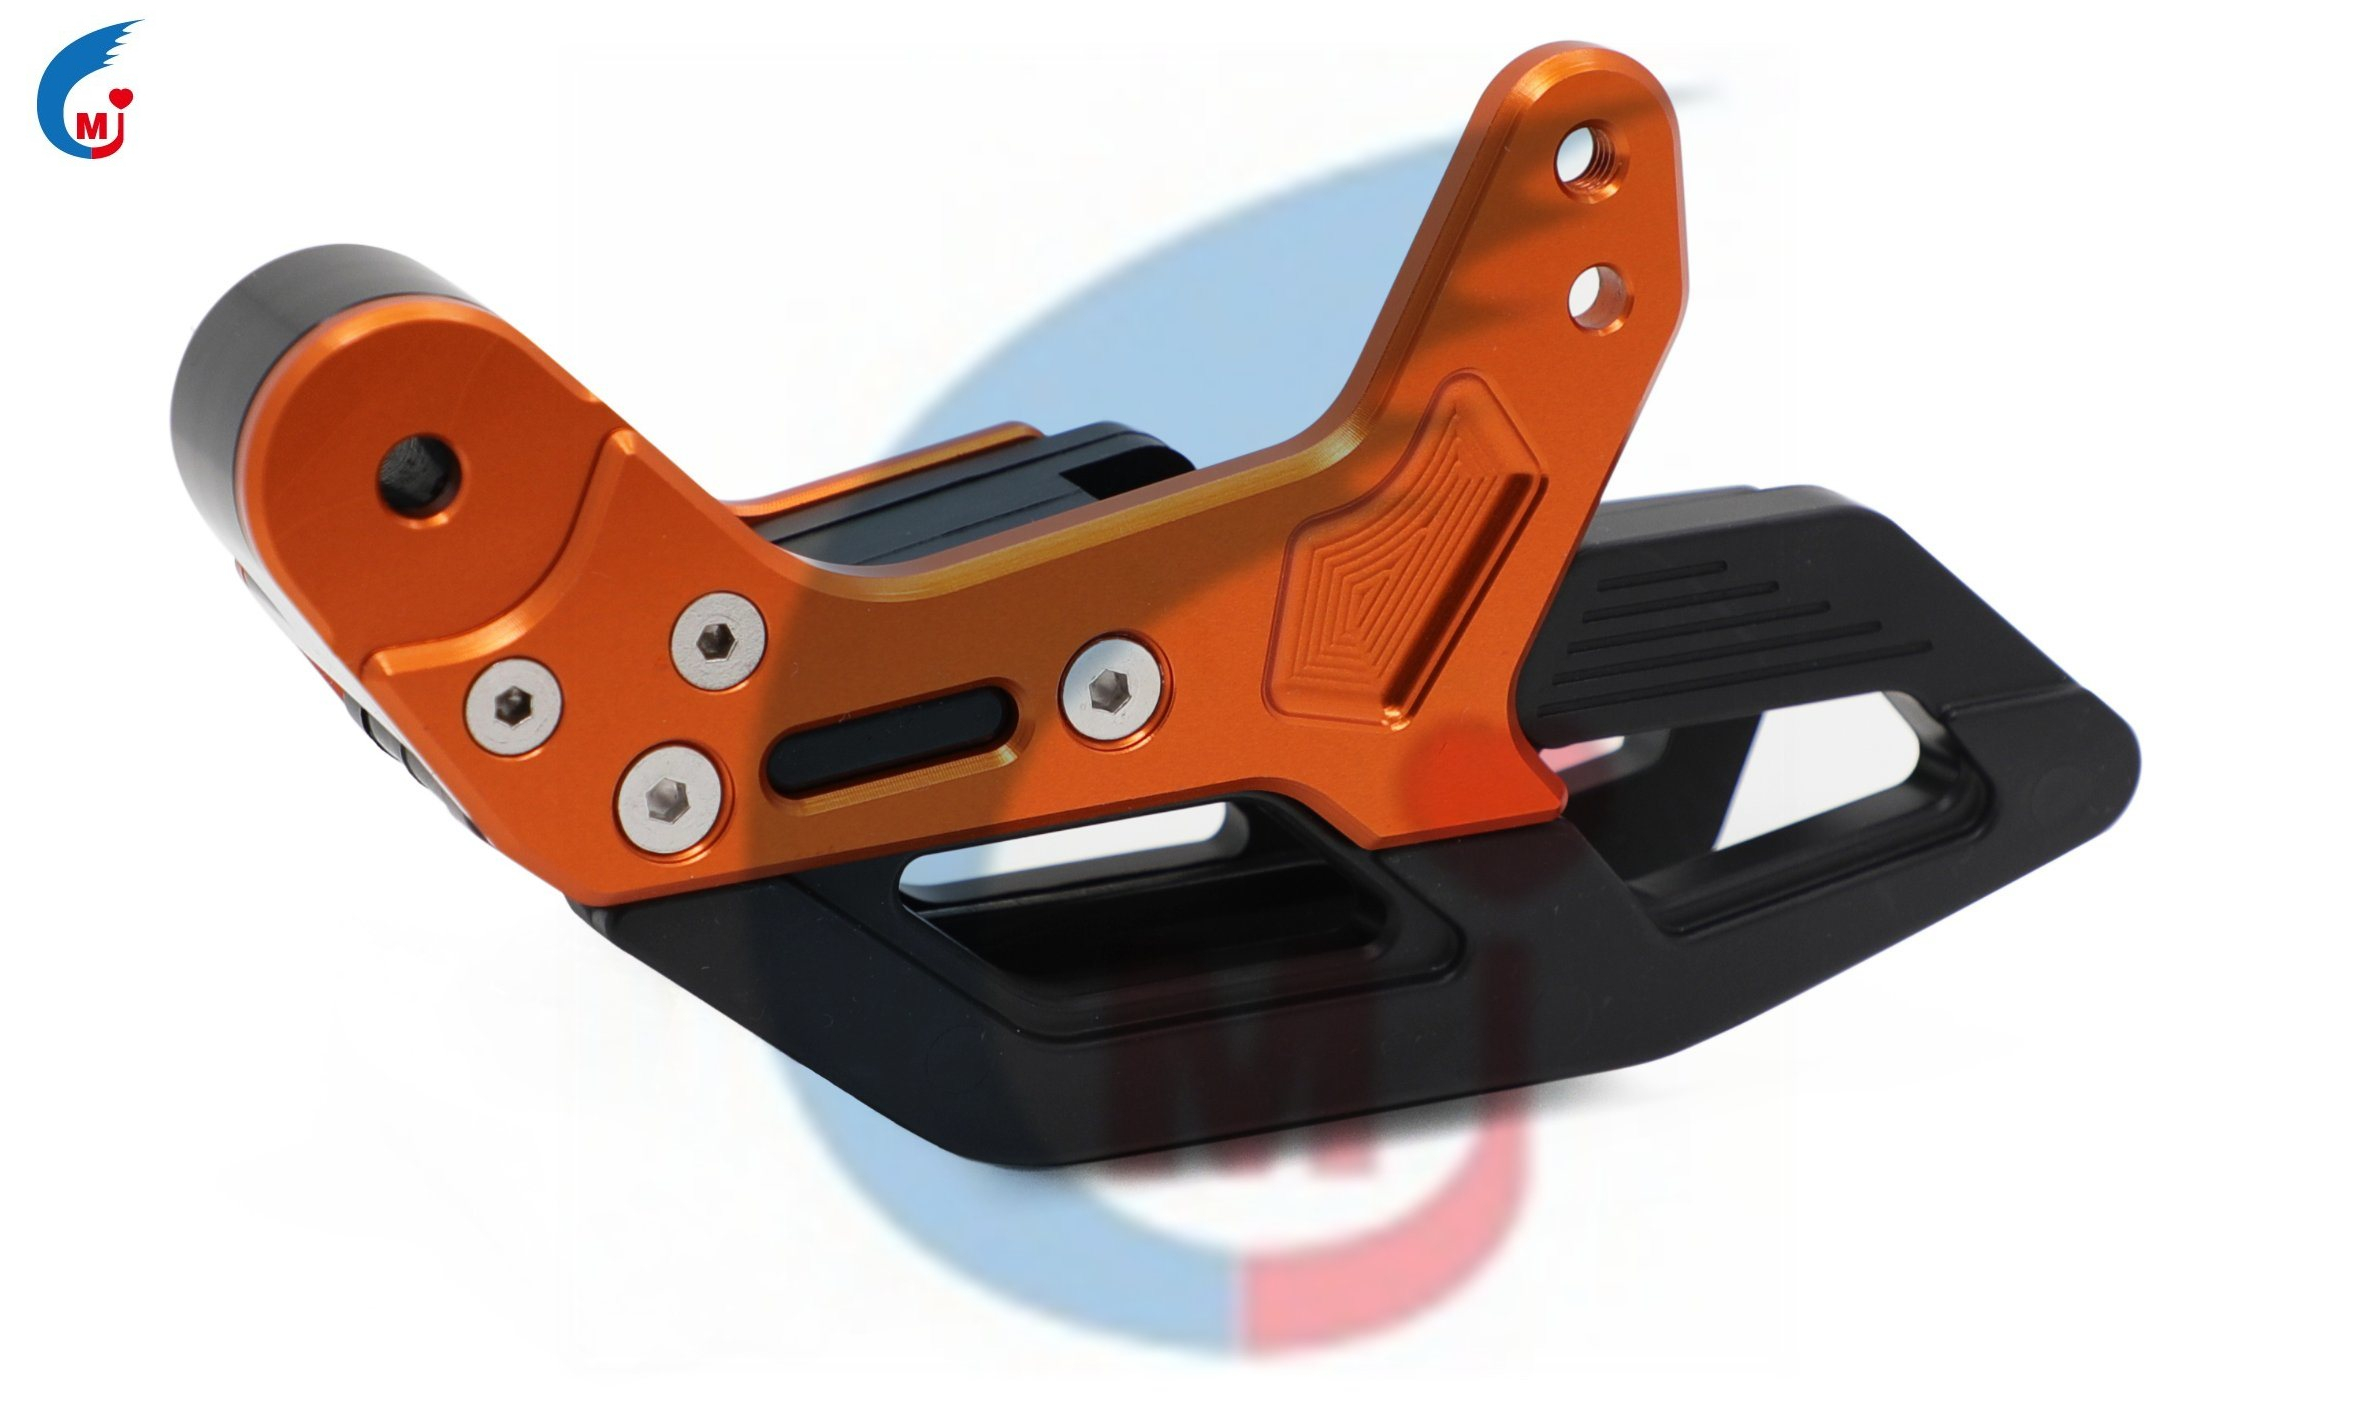 Chain Guide Protector for Ktm Dirt Offroad Bike Motorcycle Motocross Parts Accessories